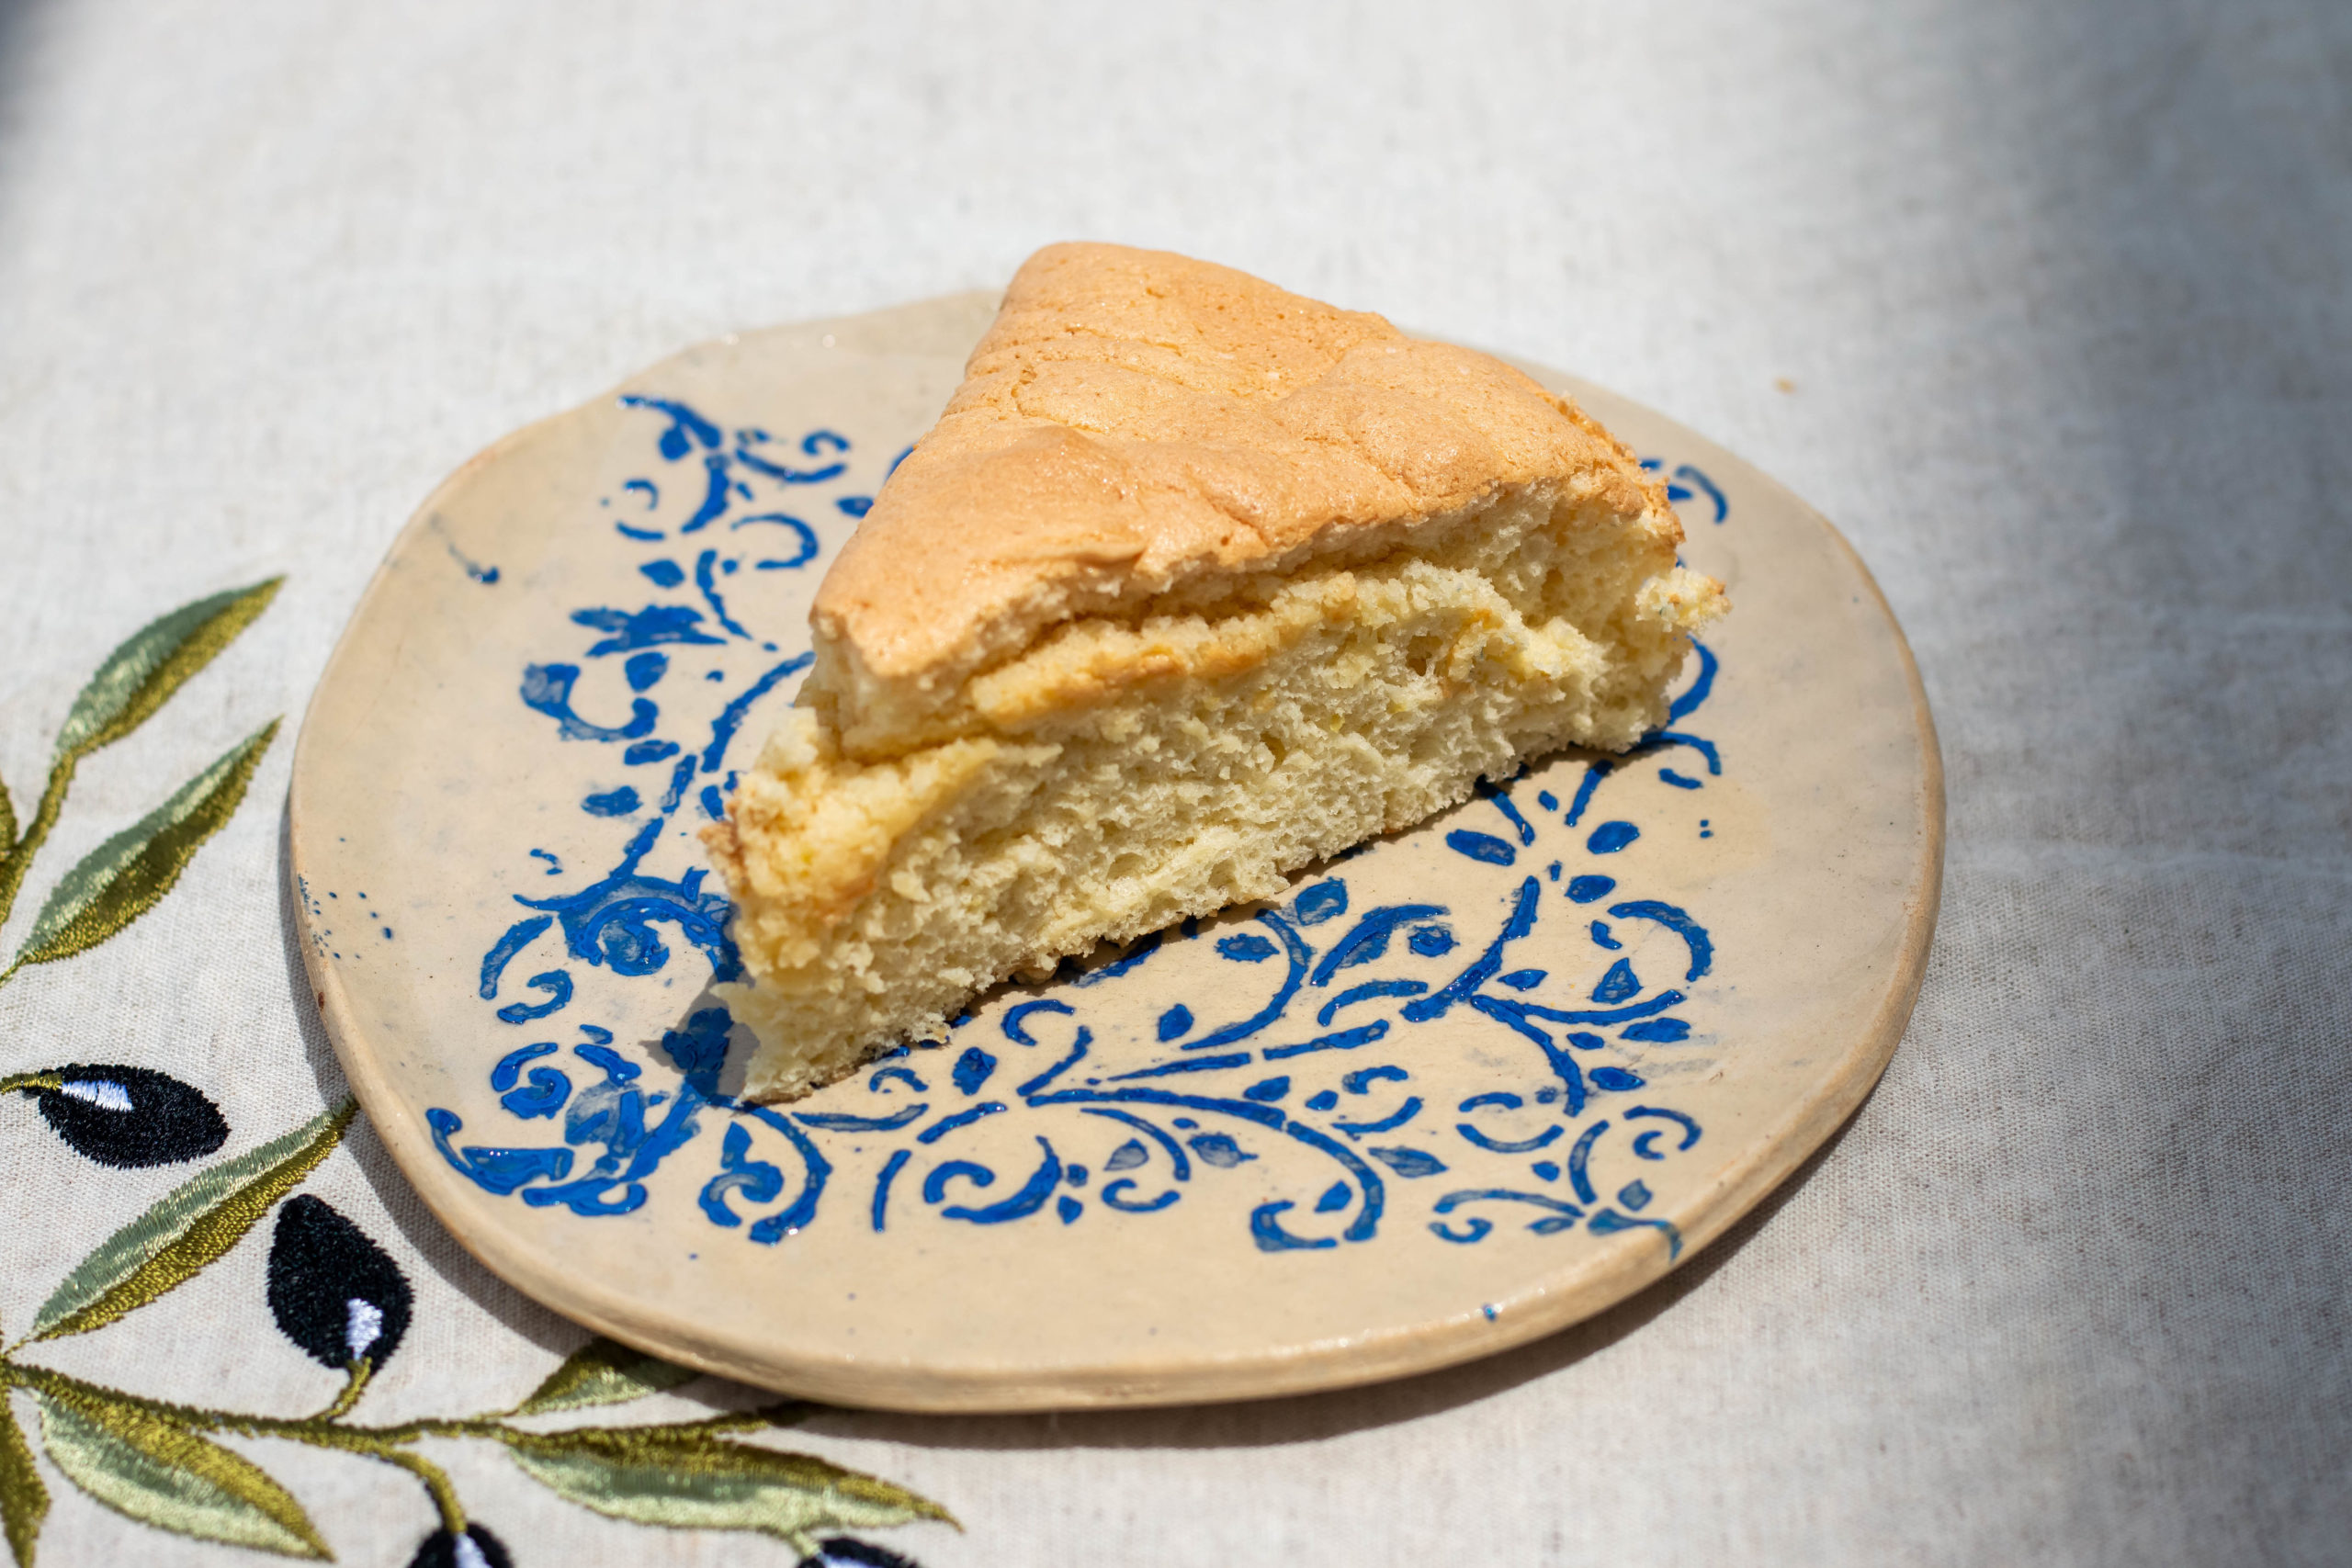 Slice of sponge cake on a cream colored plate with a blue pattern